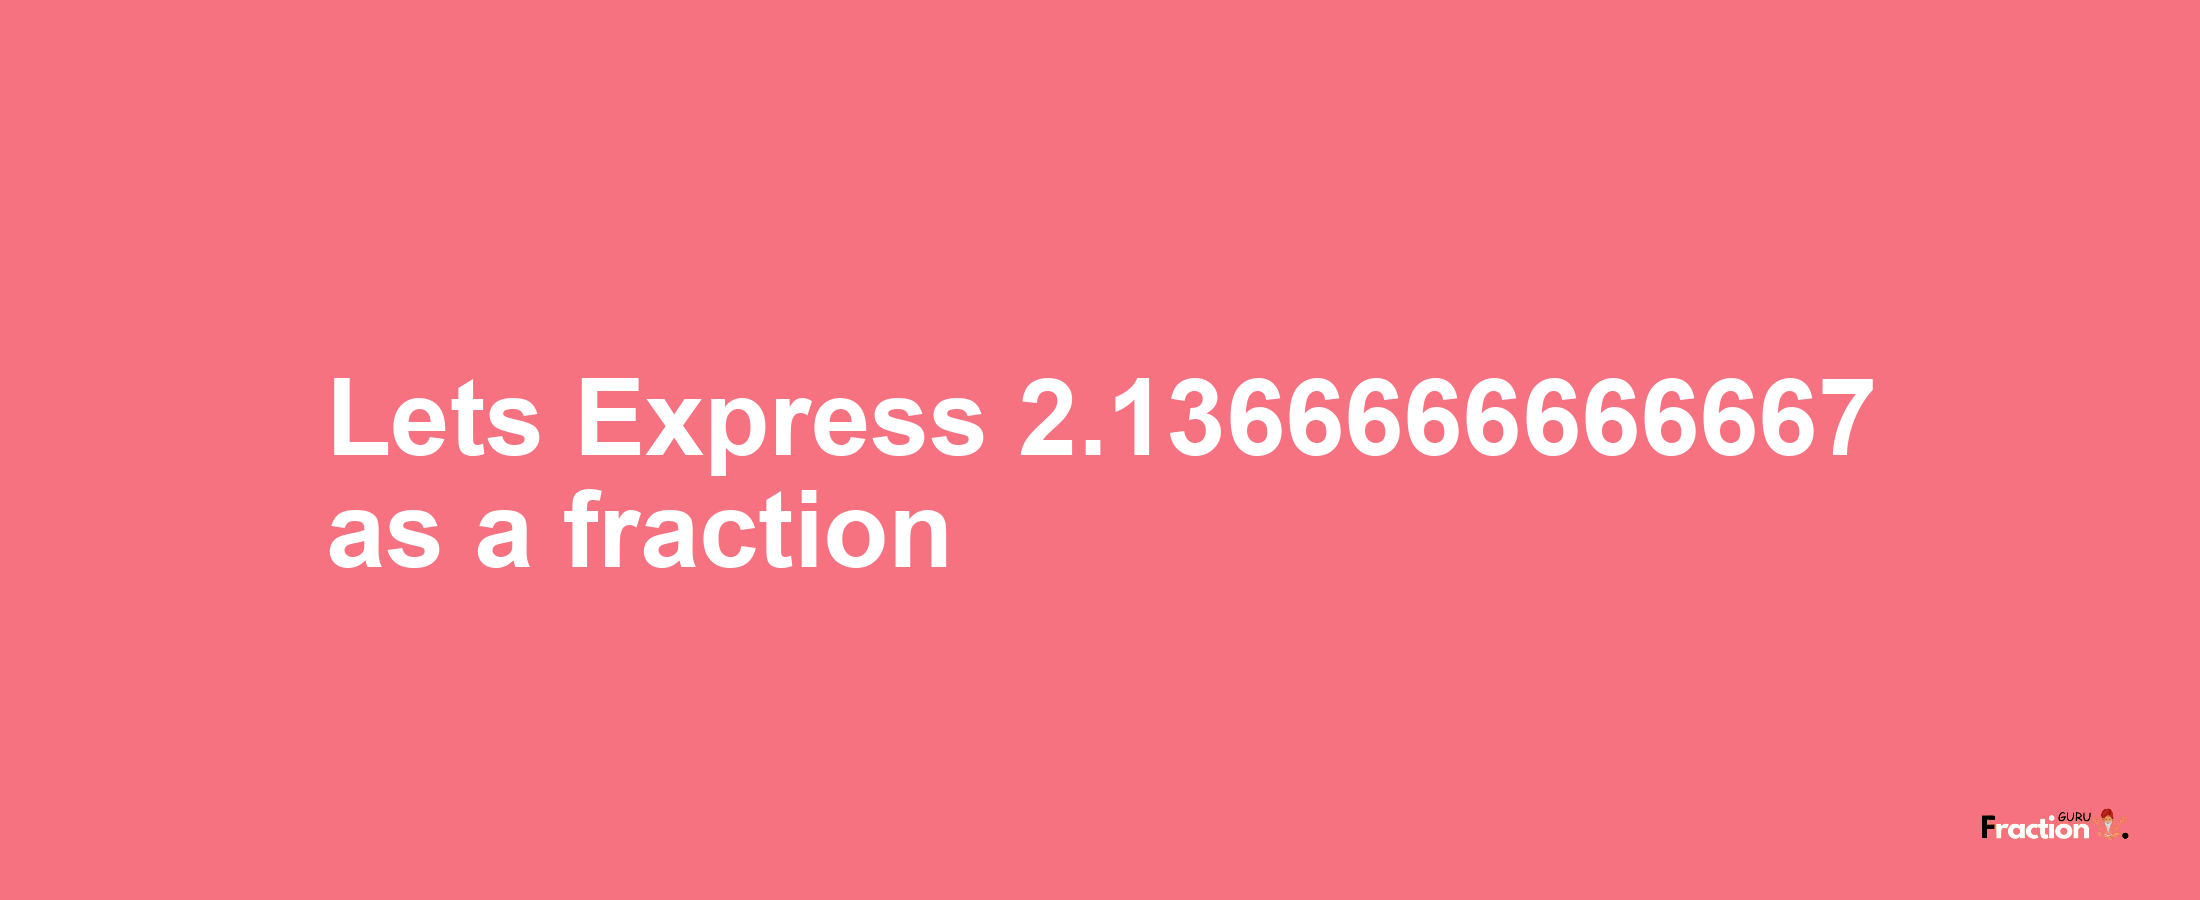 Lets Express 2.1366666666667 as afraction